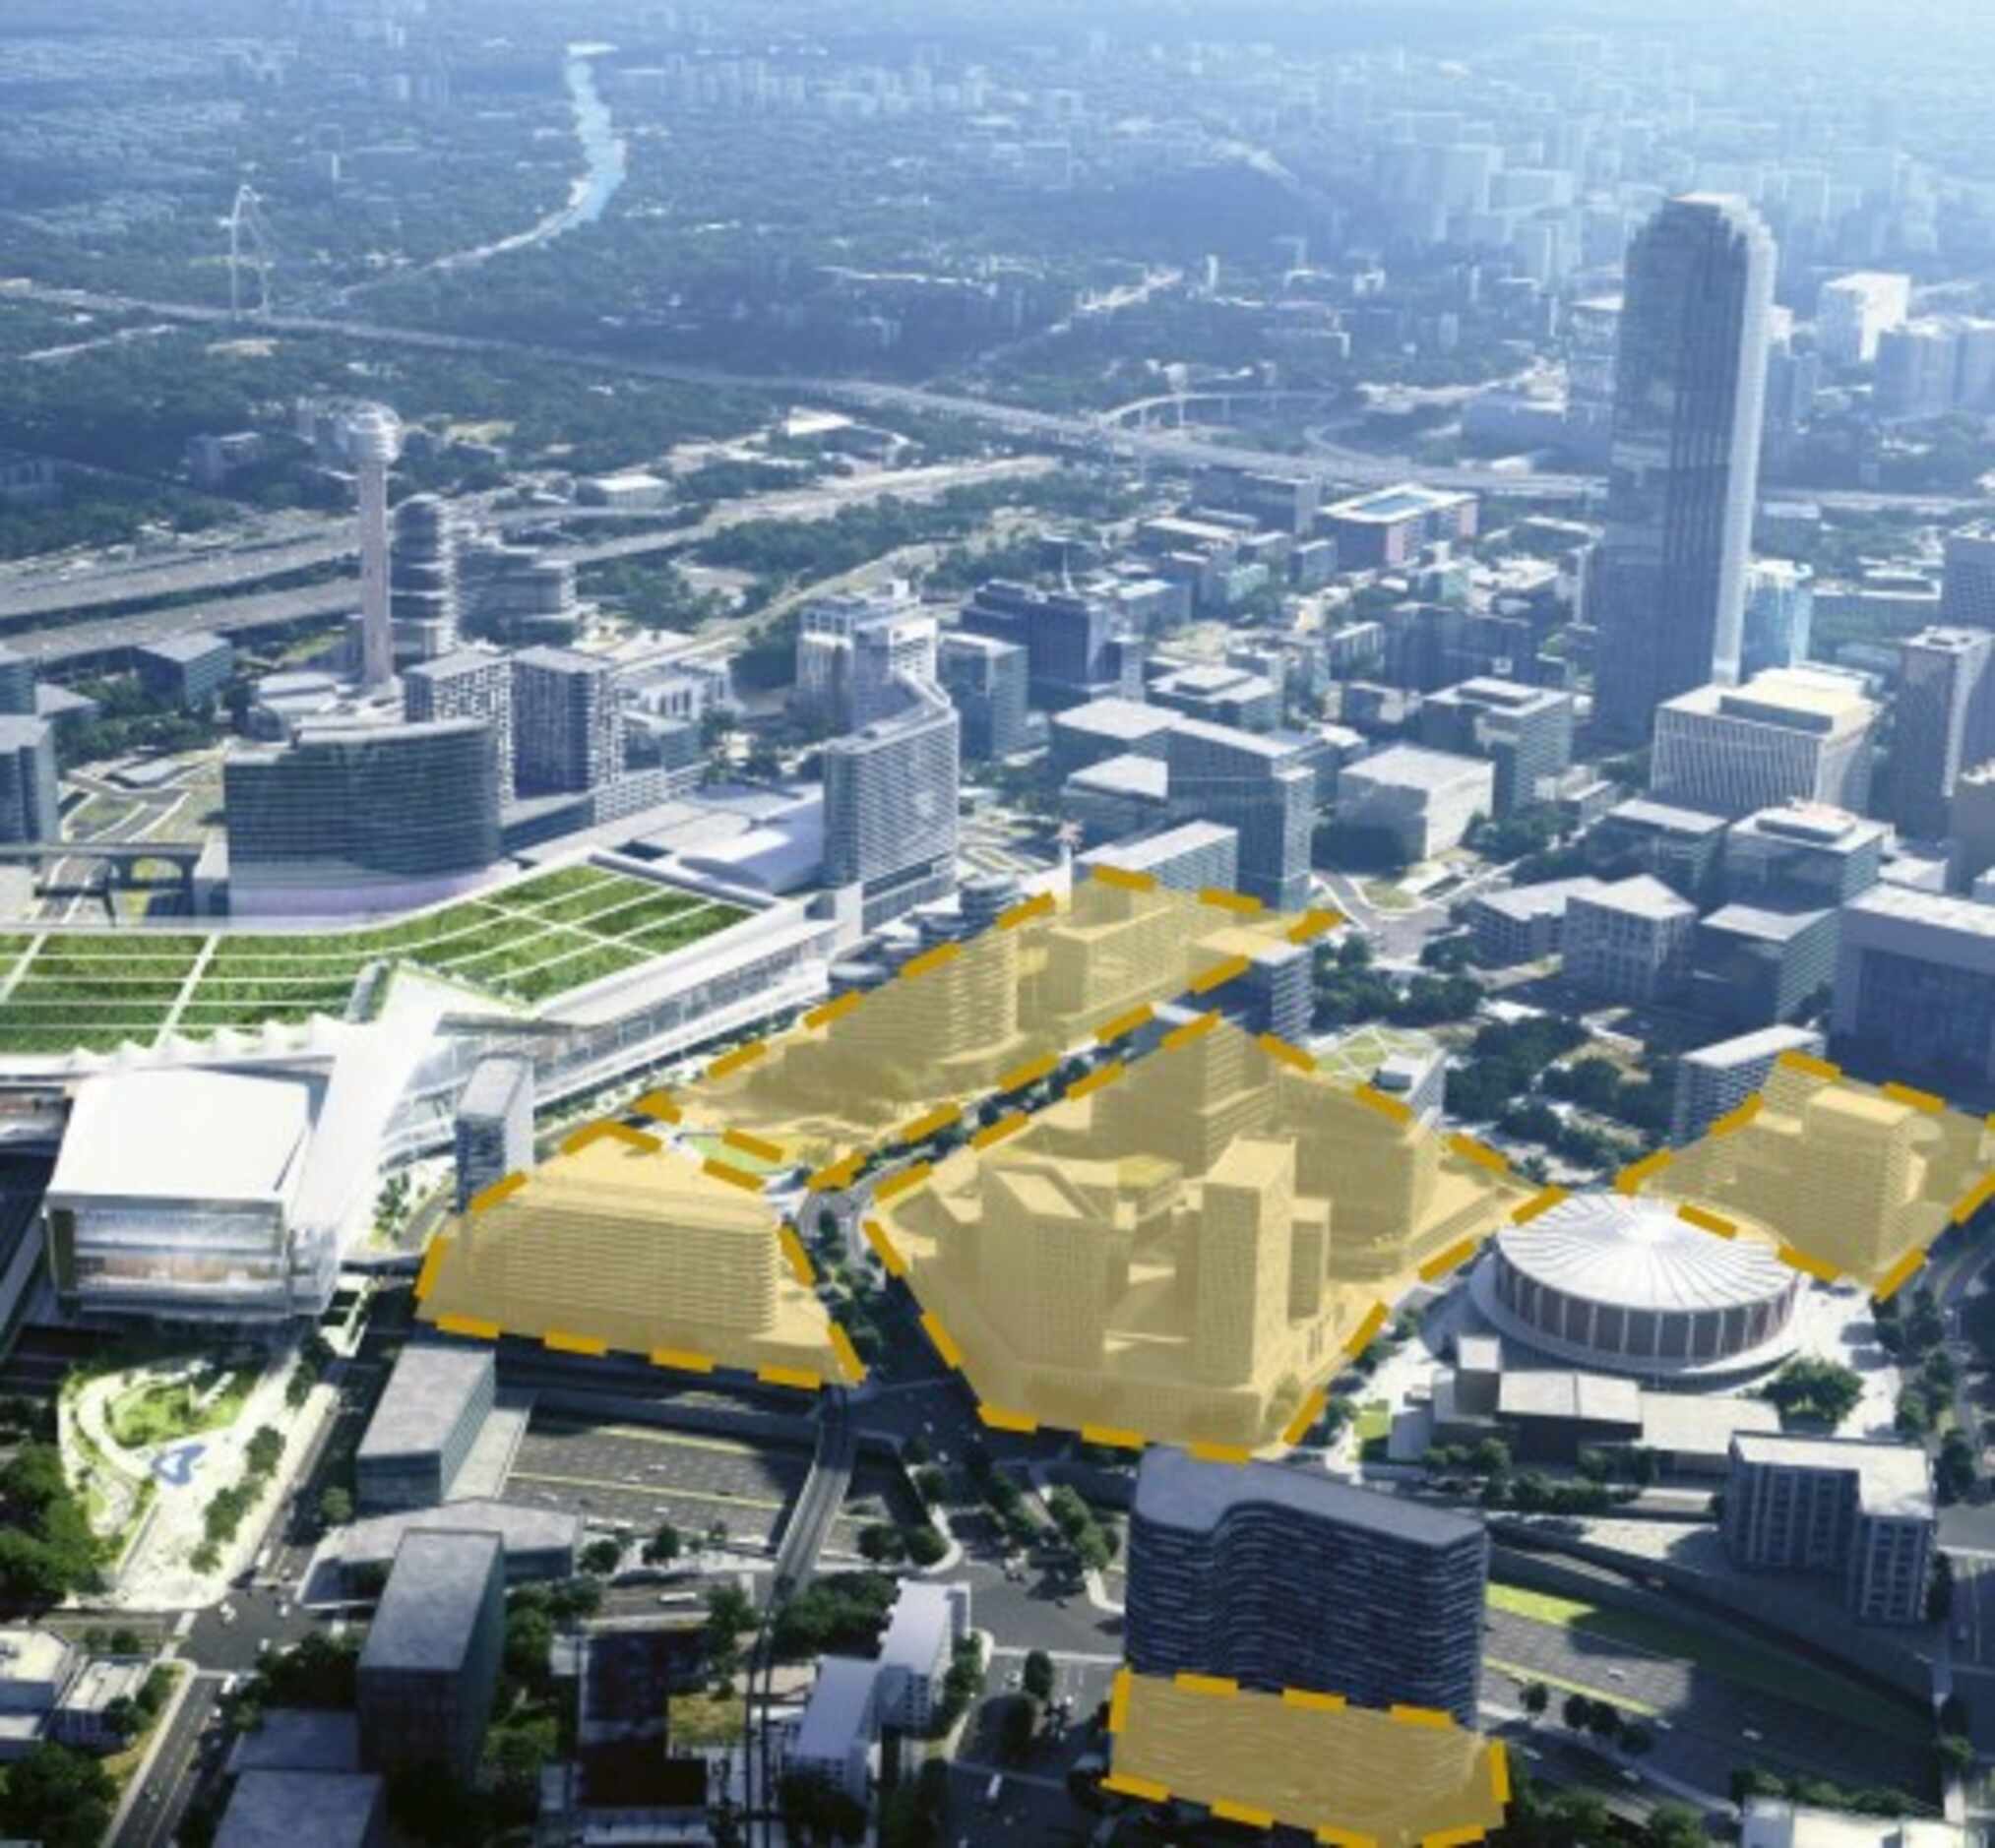 Opportunity sites for redevelopment for the proposed convention center.